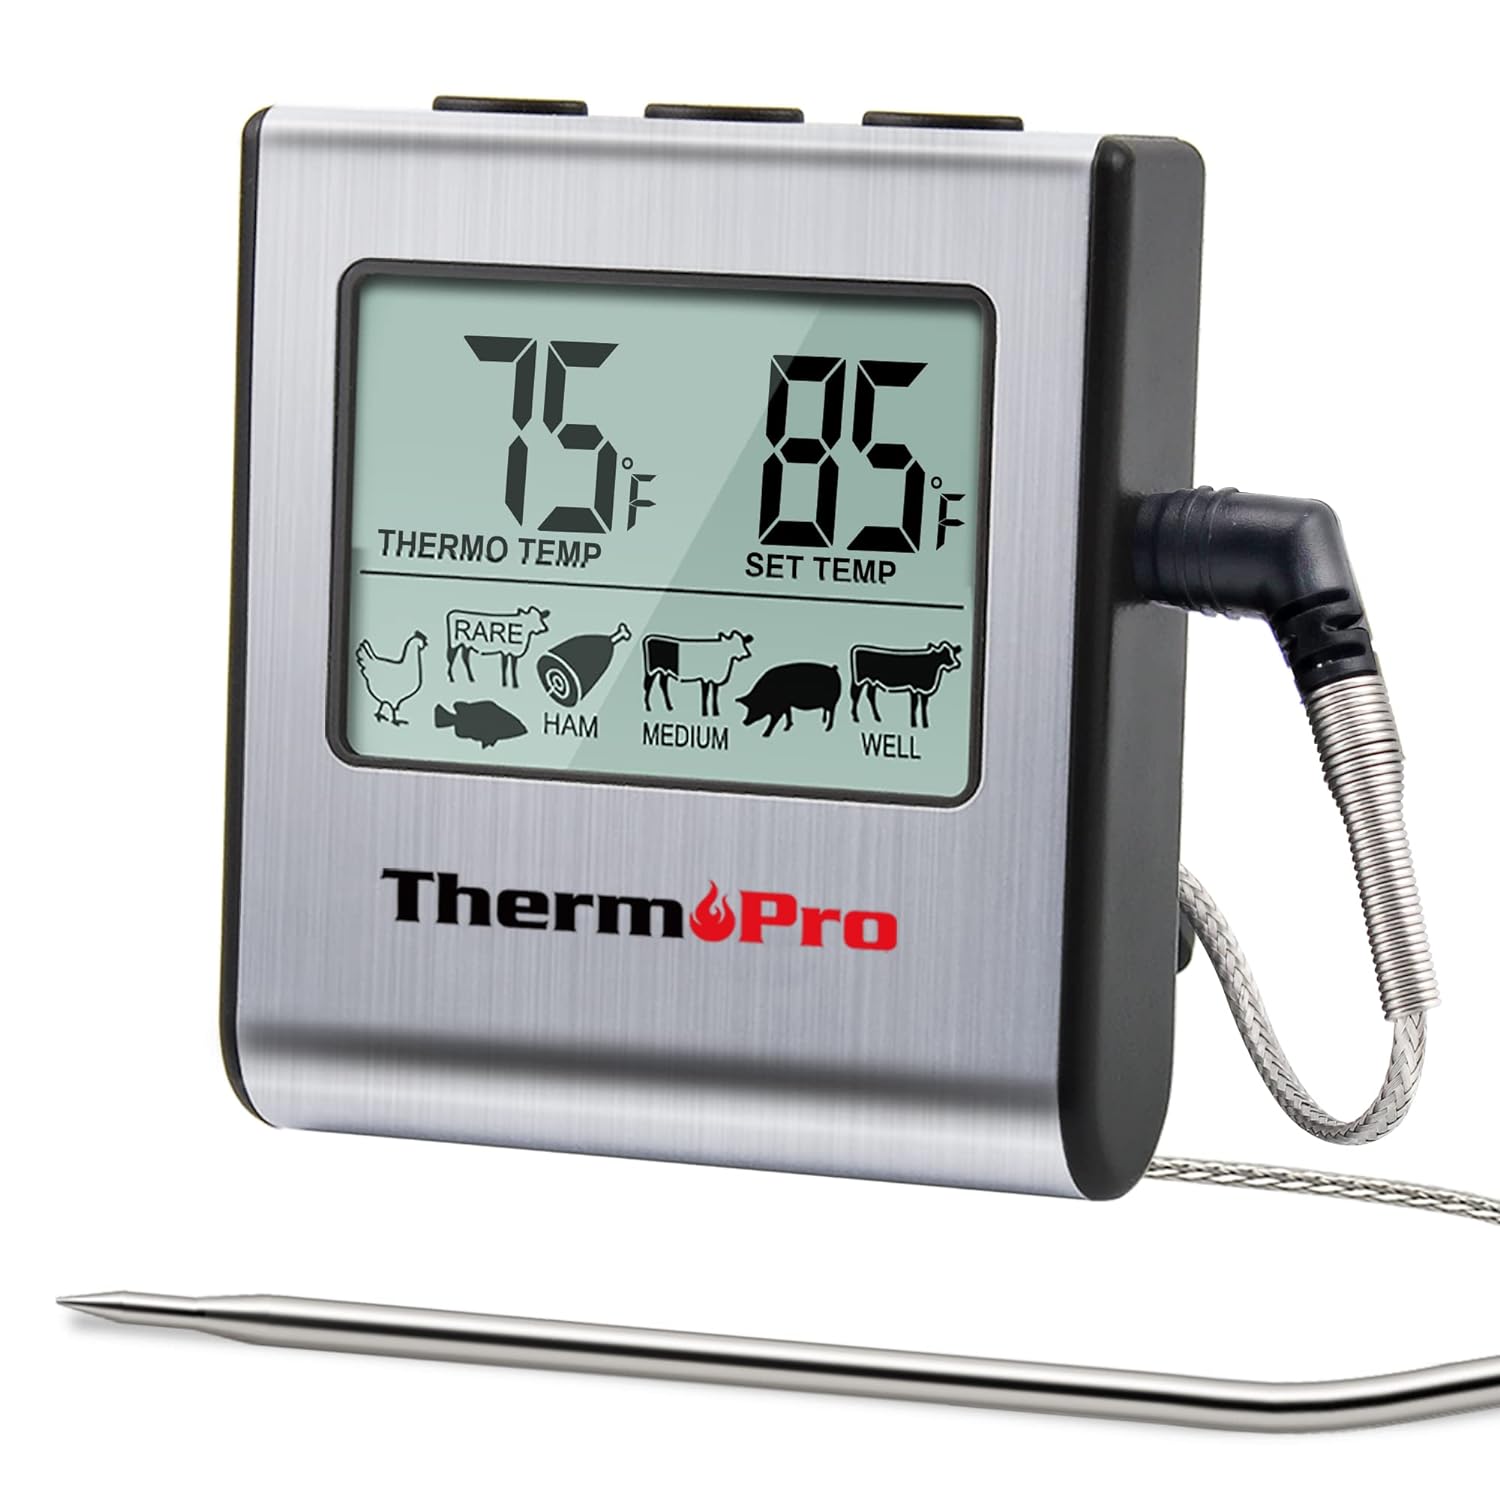 ThermoPro TP-16 Large LCD Digital Cooking Kitchen Thermometer for Food, BBQ, Grill, Meat, Oven, Smoker with Stainless Steel Step-Down Probe and Built in Clock Timer